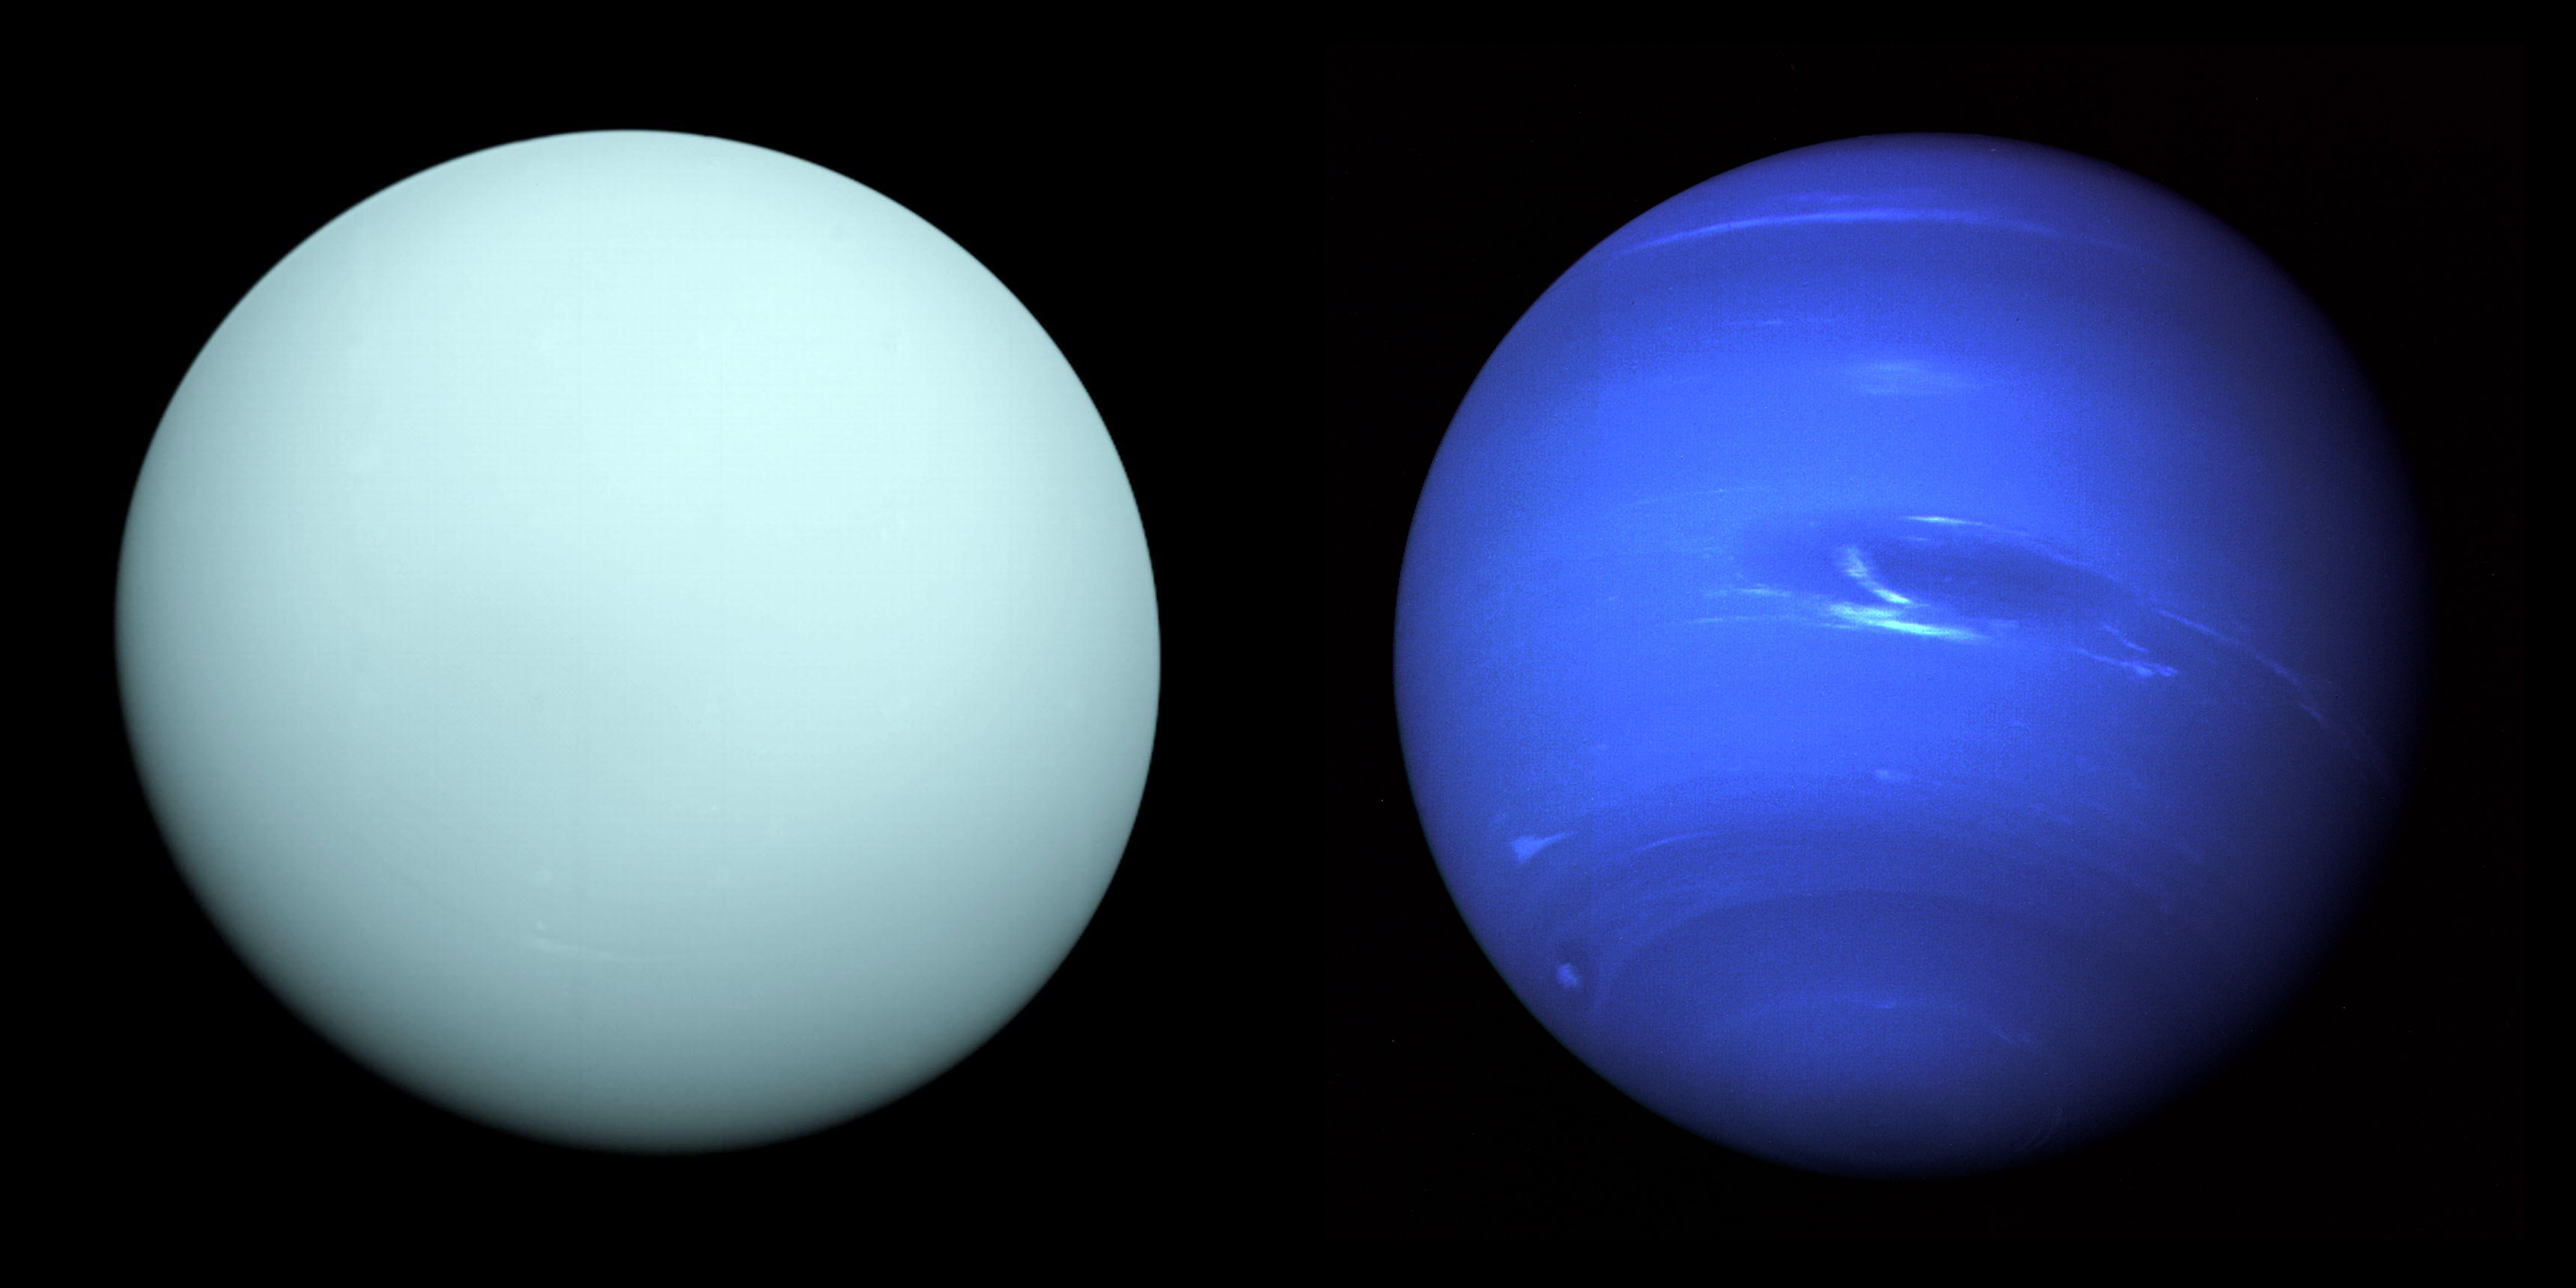 Side-by-side photos of Uranus and Neptune, both taken by Voyager 2.